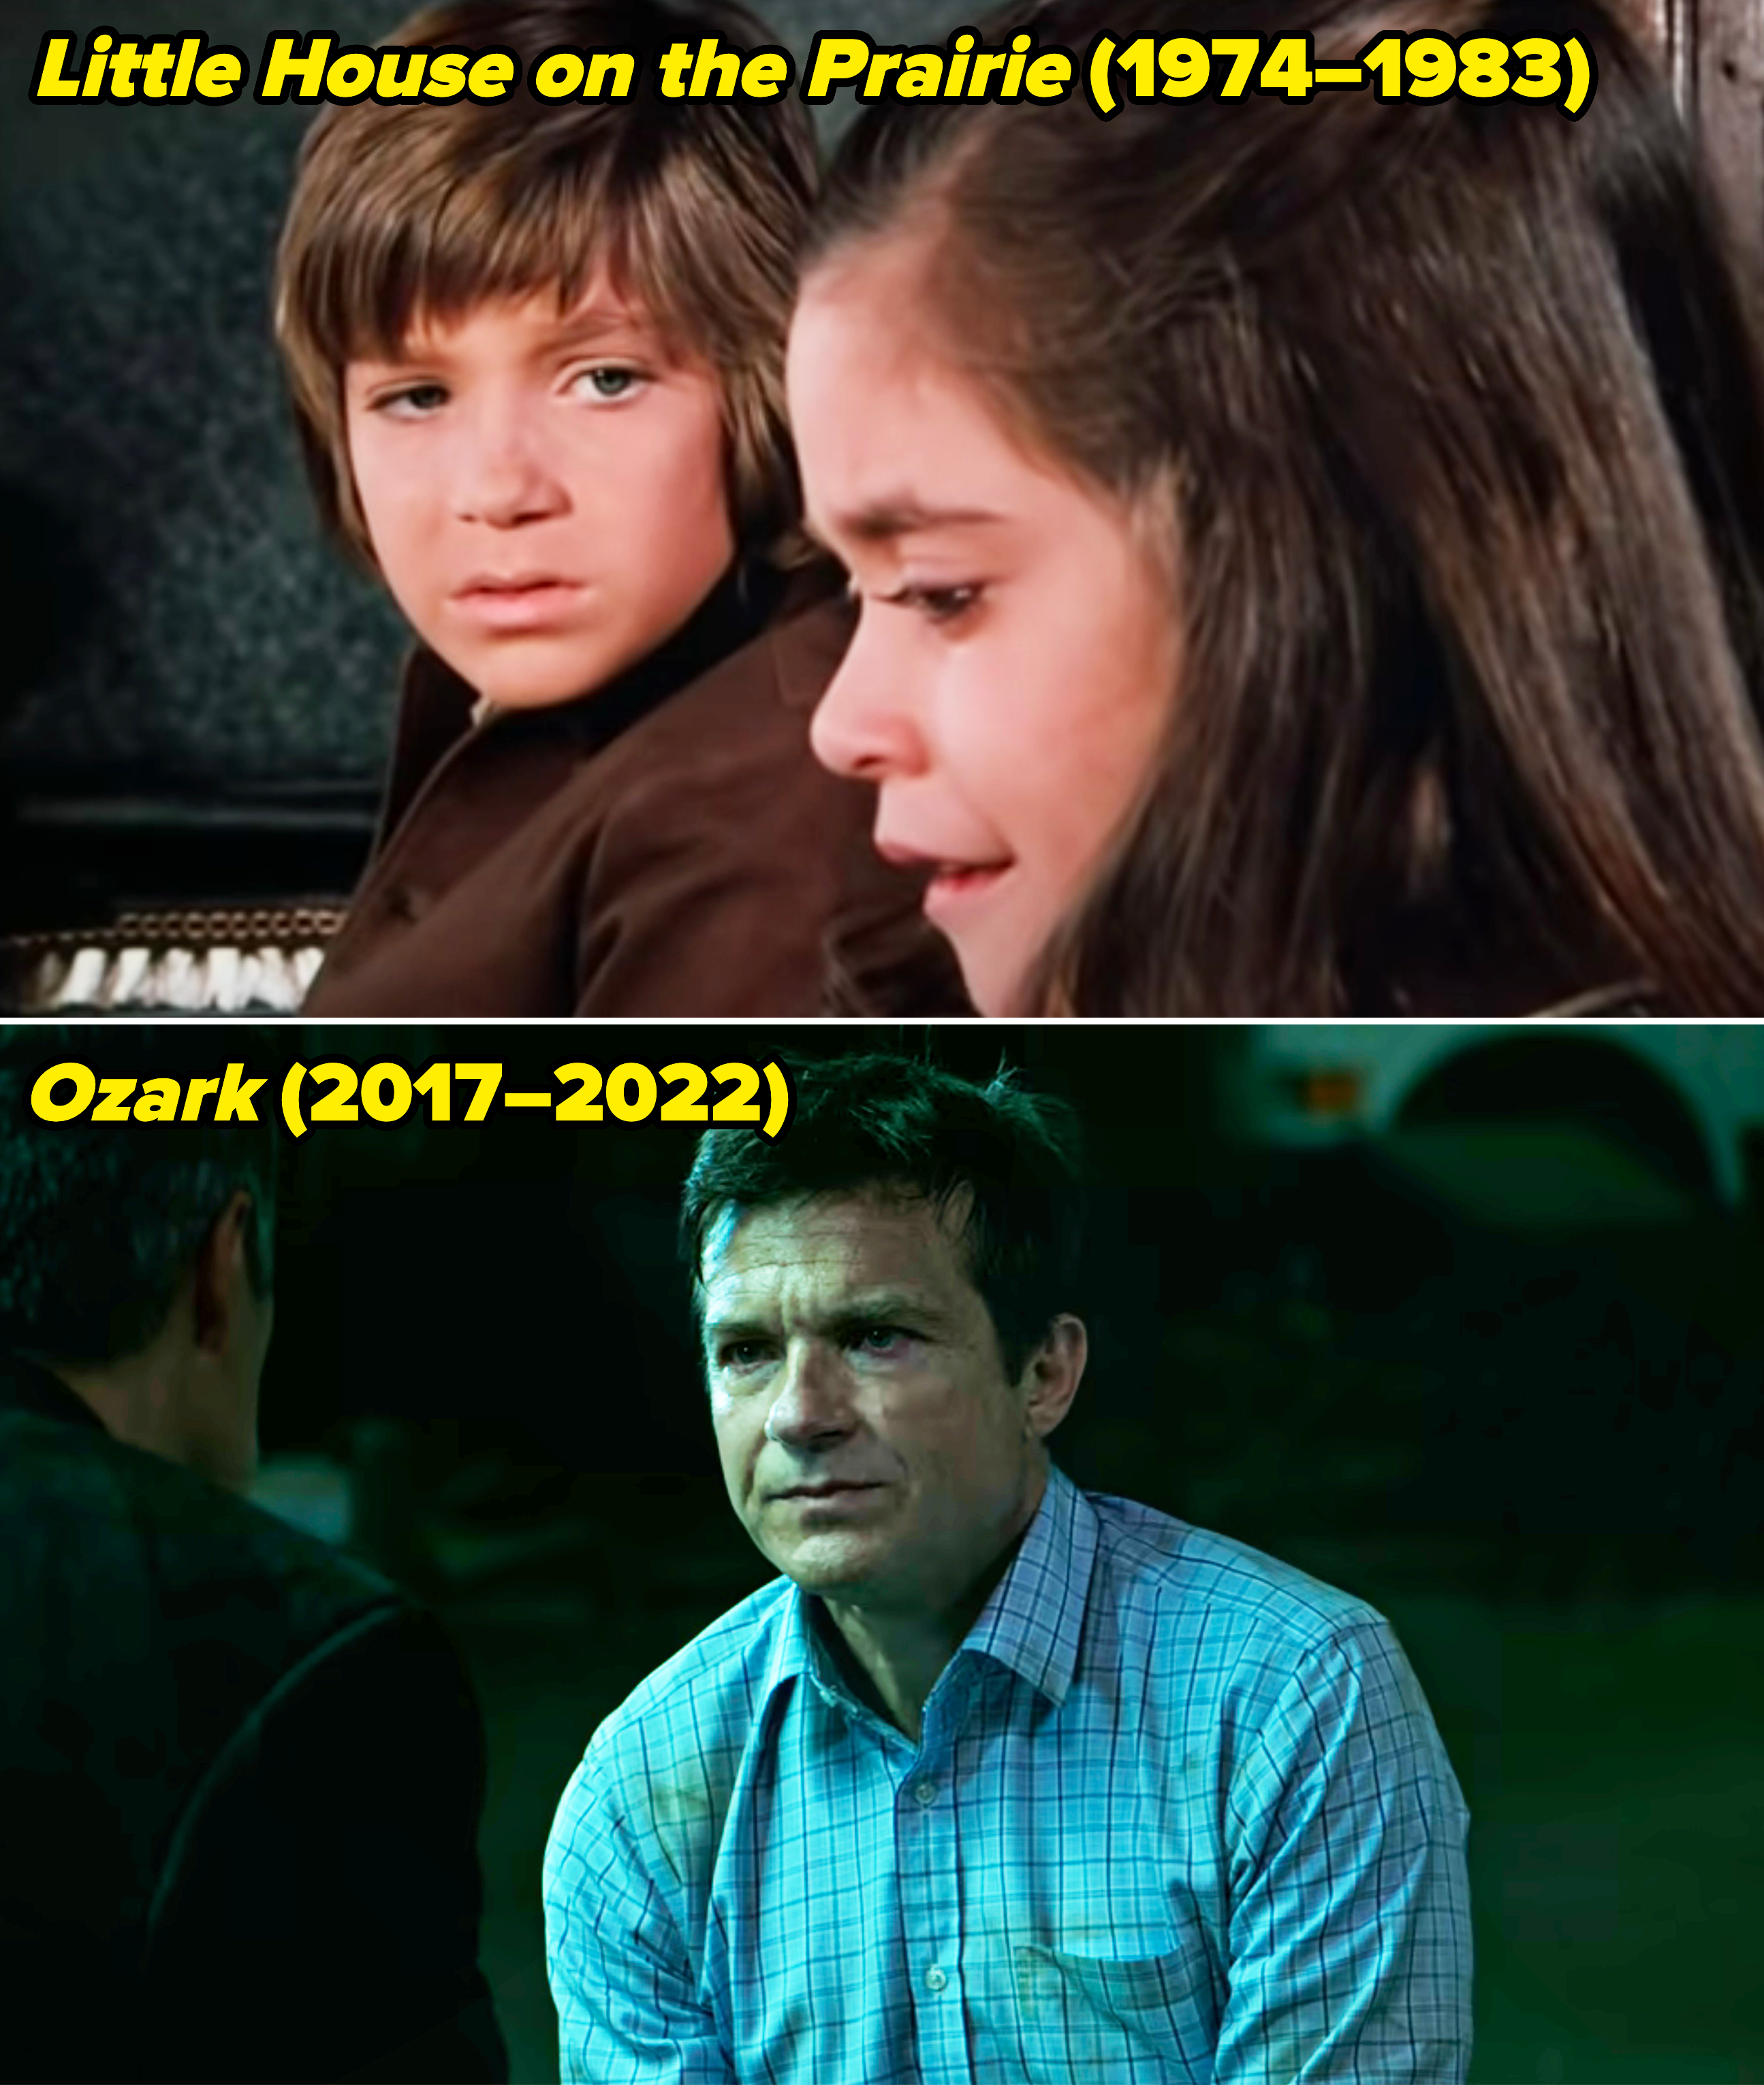 him acting as a child and then a closeup of him in ozark